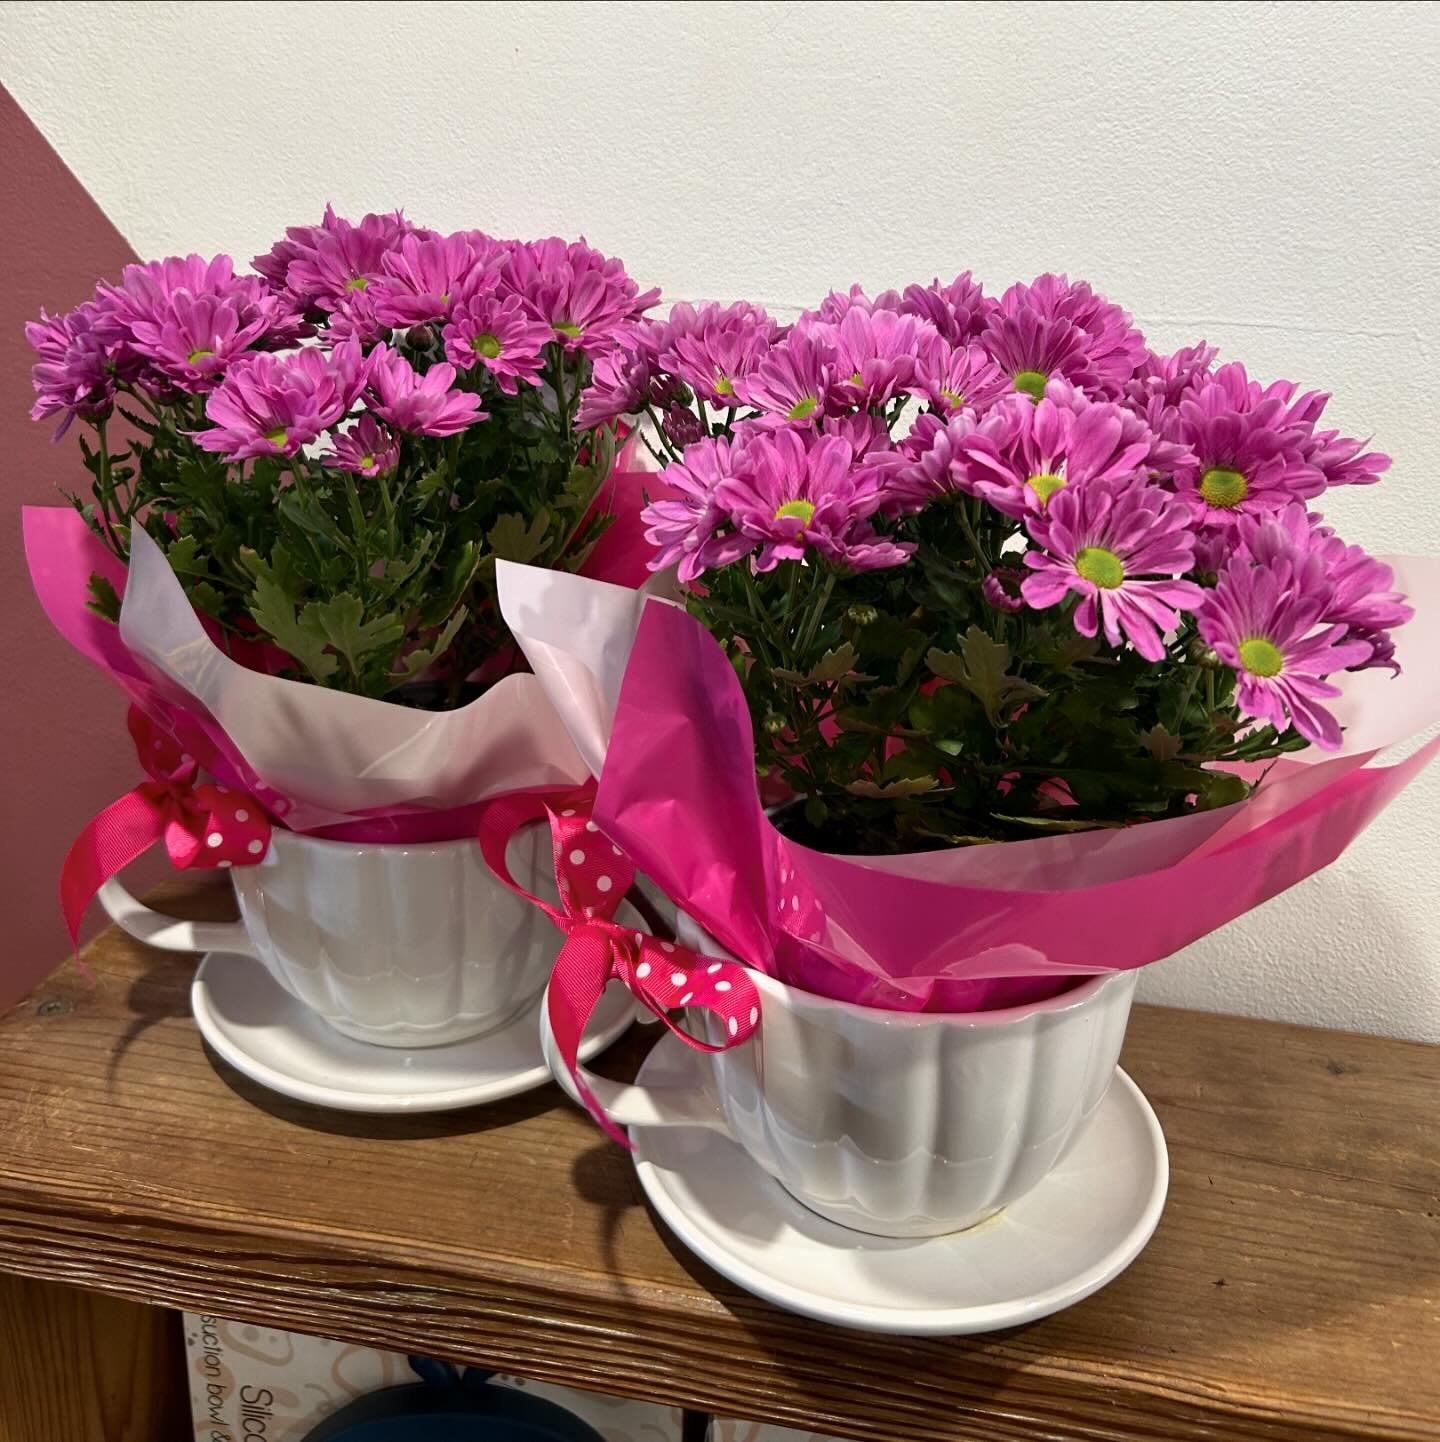 The Chrysanthemum (Chrysanthemum paludosum) is one of the most popular Mother&rsquo;s Day Gifts, not only because it has the word &lsquo;mum&rsquo; in its name, but because they are long flowering, easy to grow and are absolutely beautiful.&nbsp; The